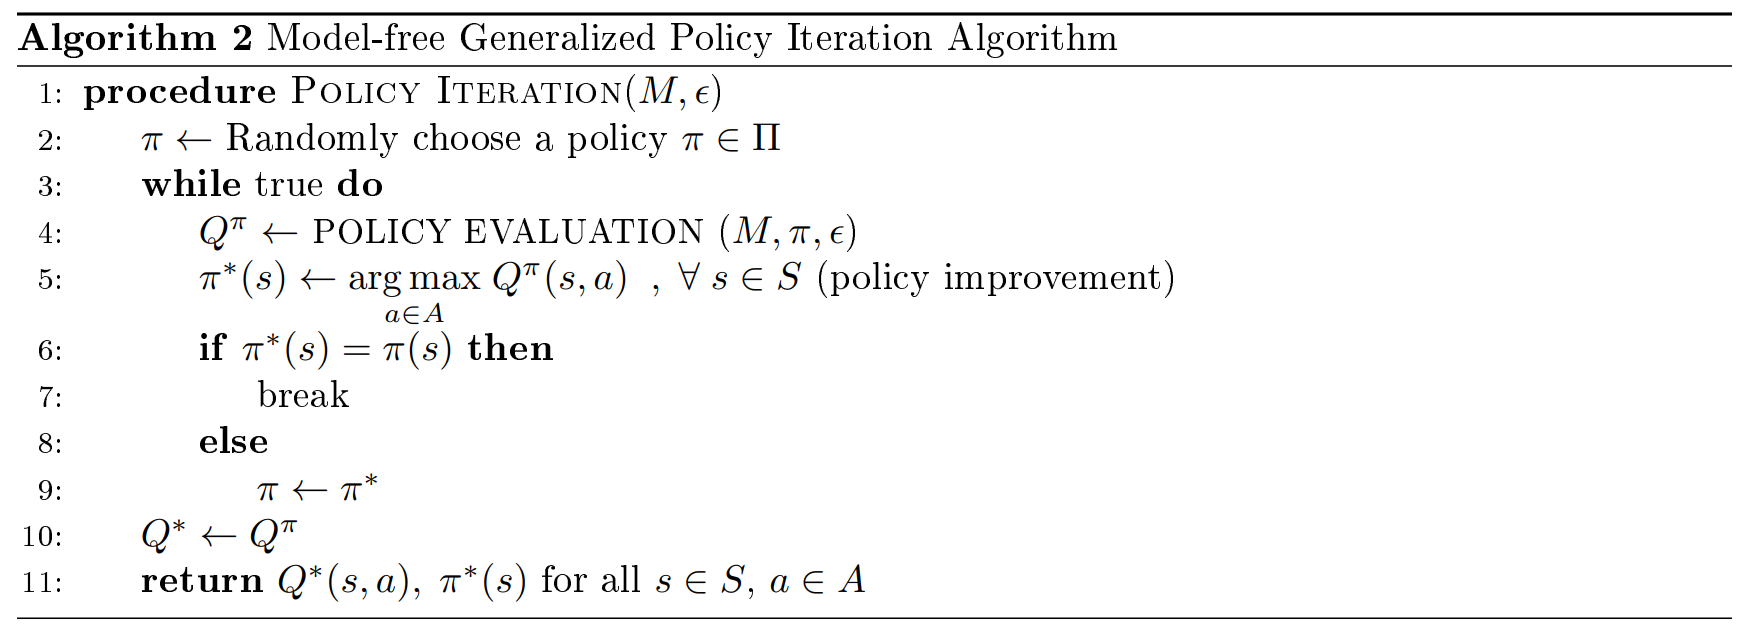 docs/stanford-cs234-notes-zh/img/fig4_alg_2.png